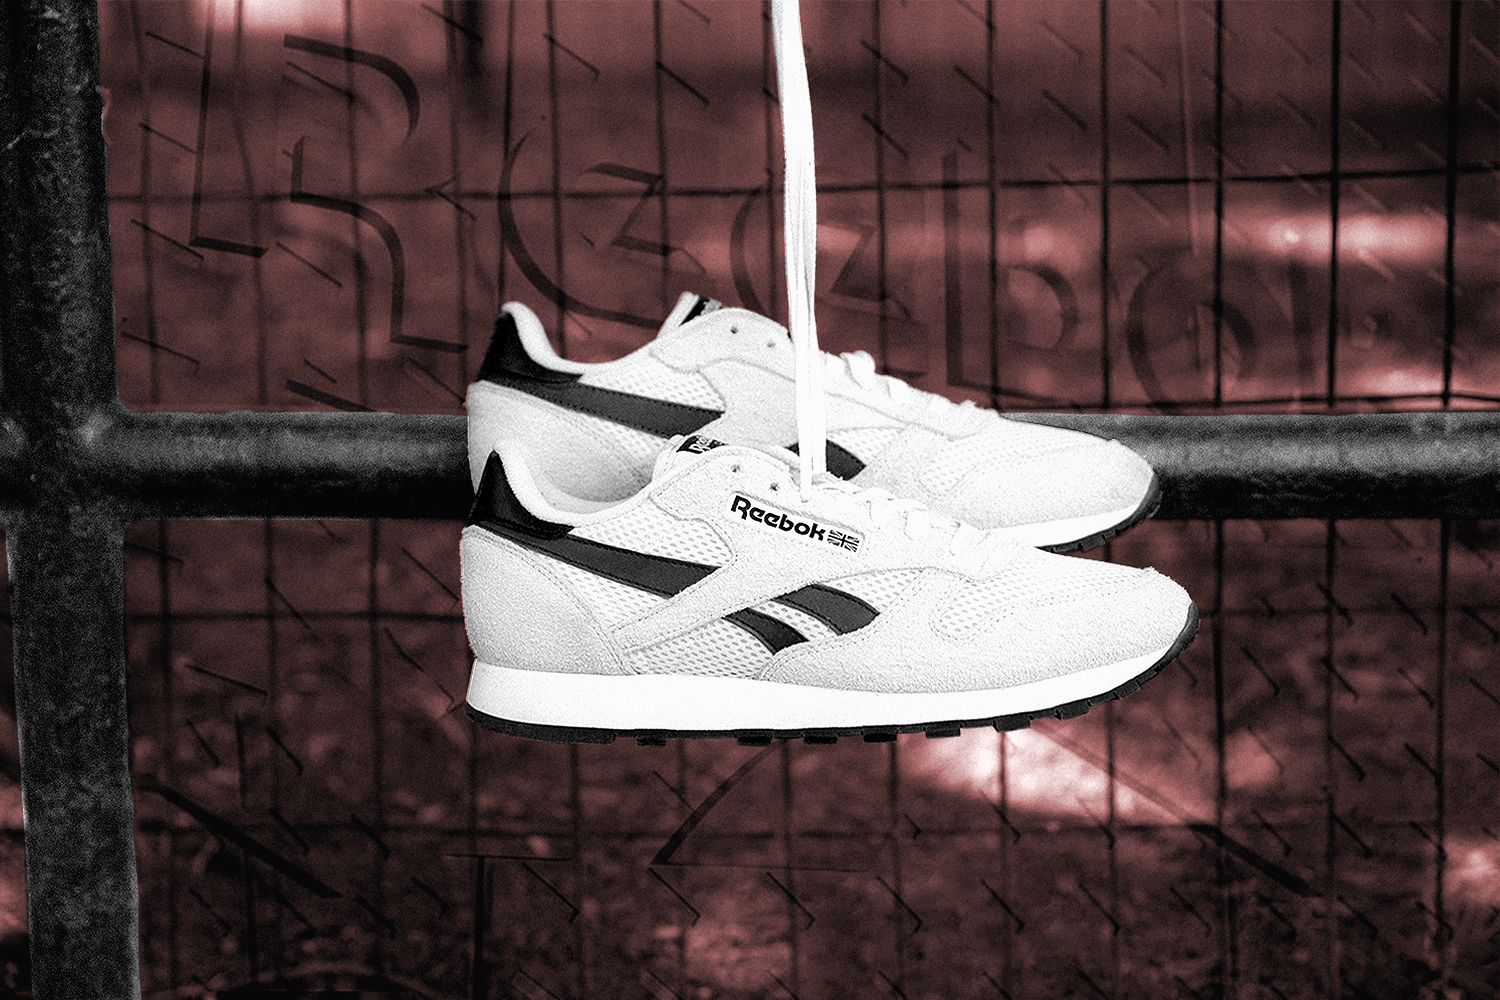 Why Authentic Brands Group Added Reebok to Its Portfolio